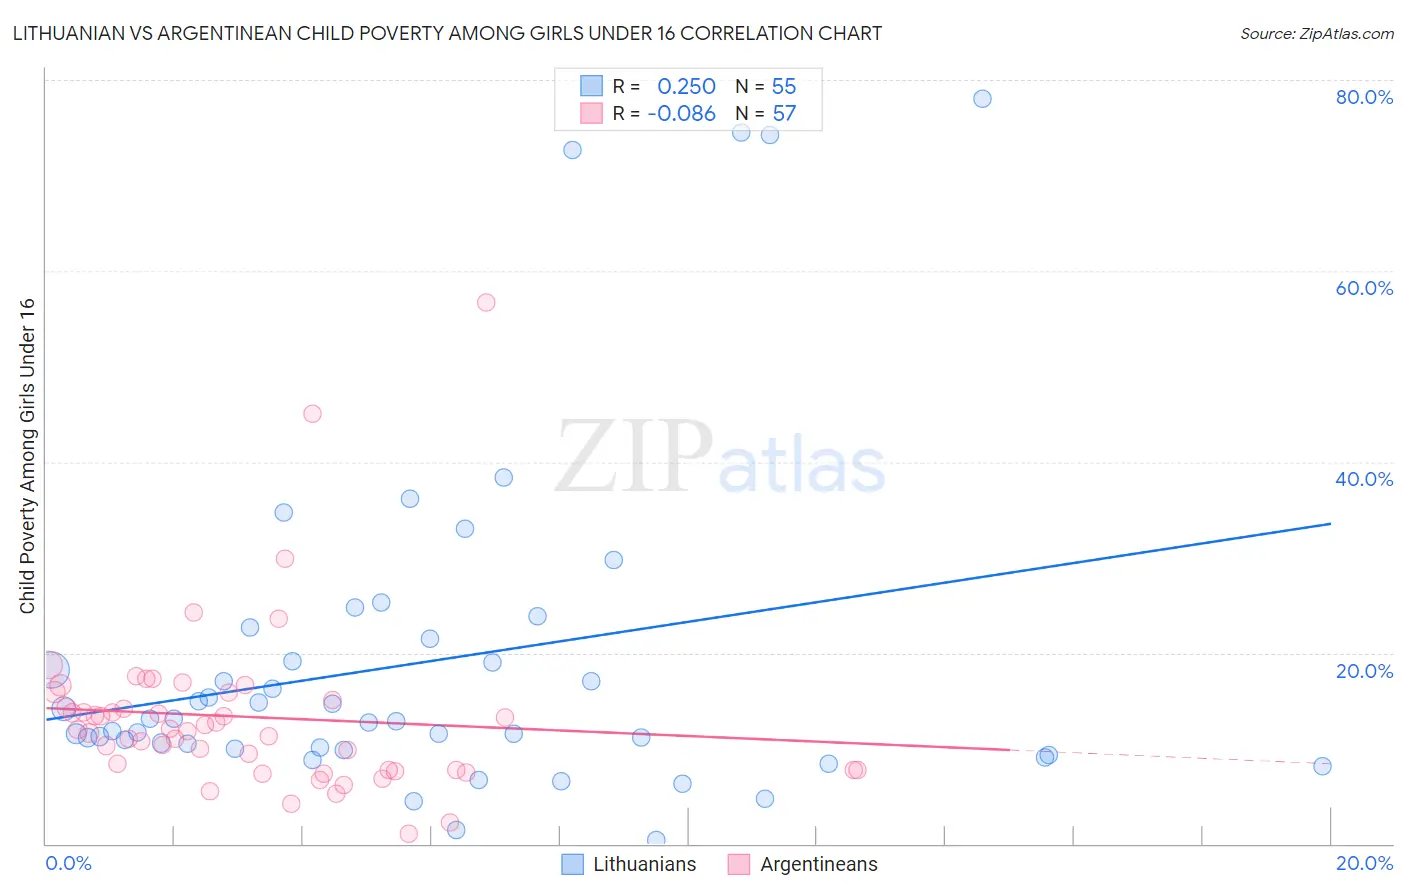 Lithuanian vs Argentinean Child Poverty Among Girls Under 16